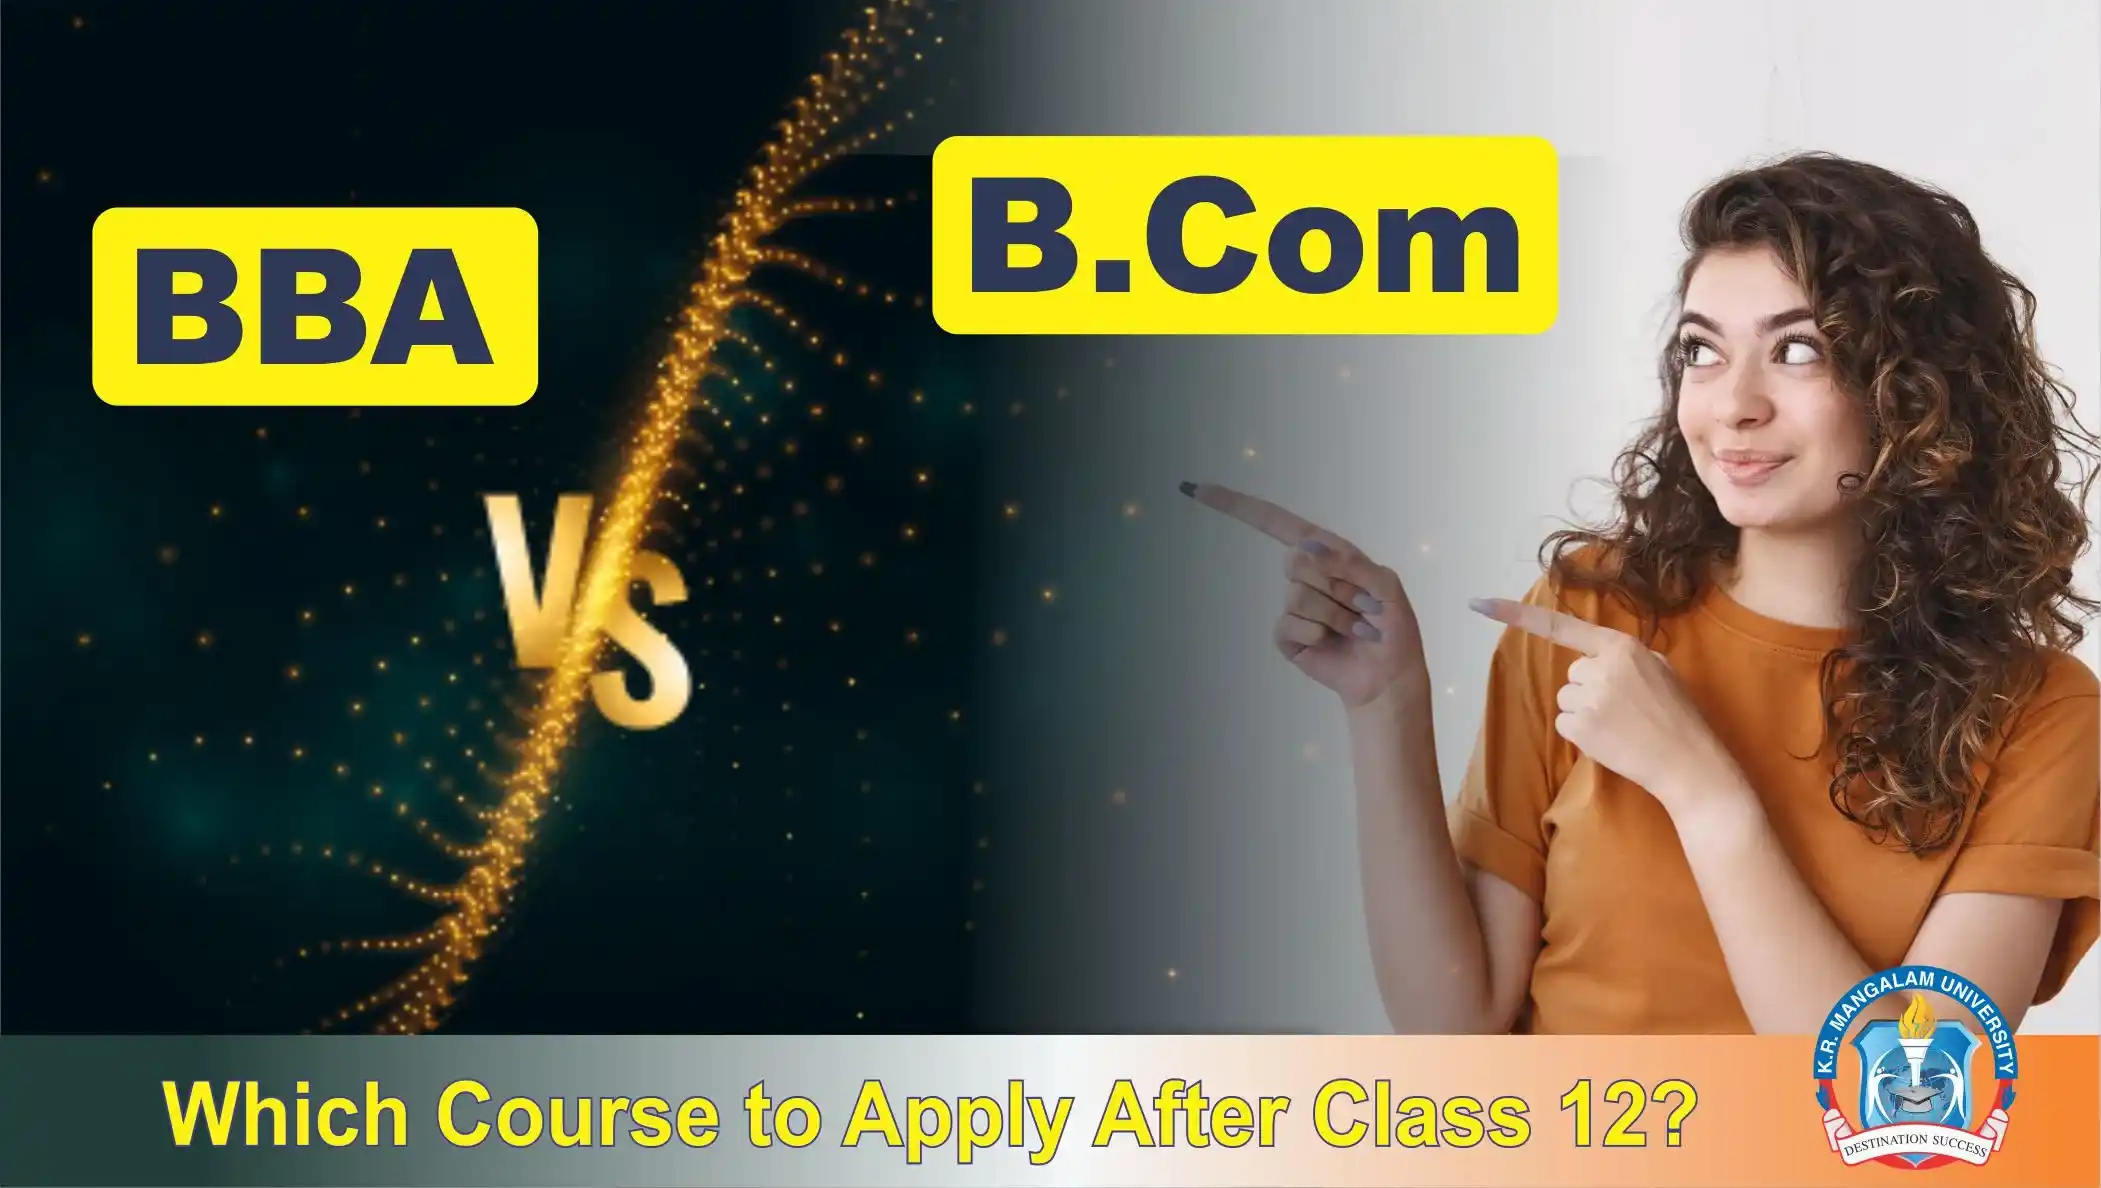 BBA vs B.Com: Which Course to Apply After Class 12?